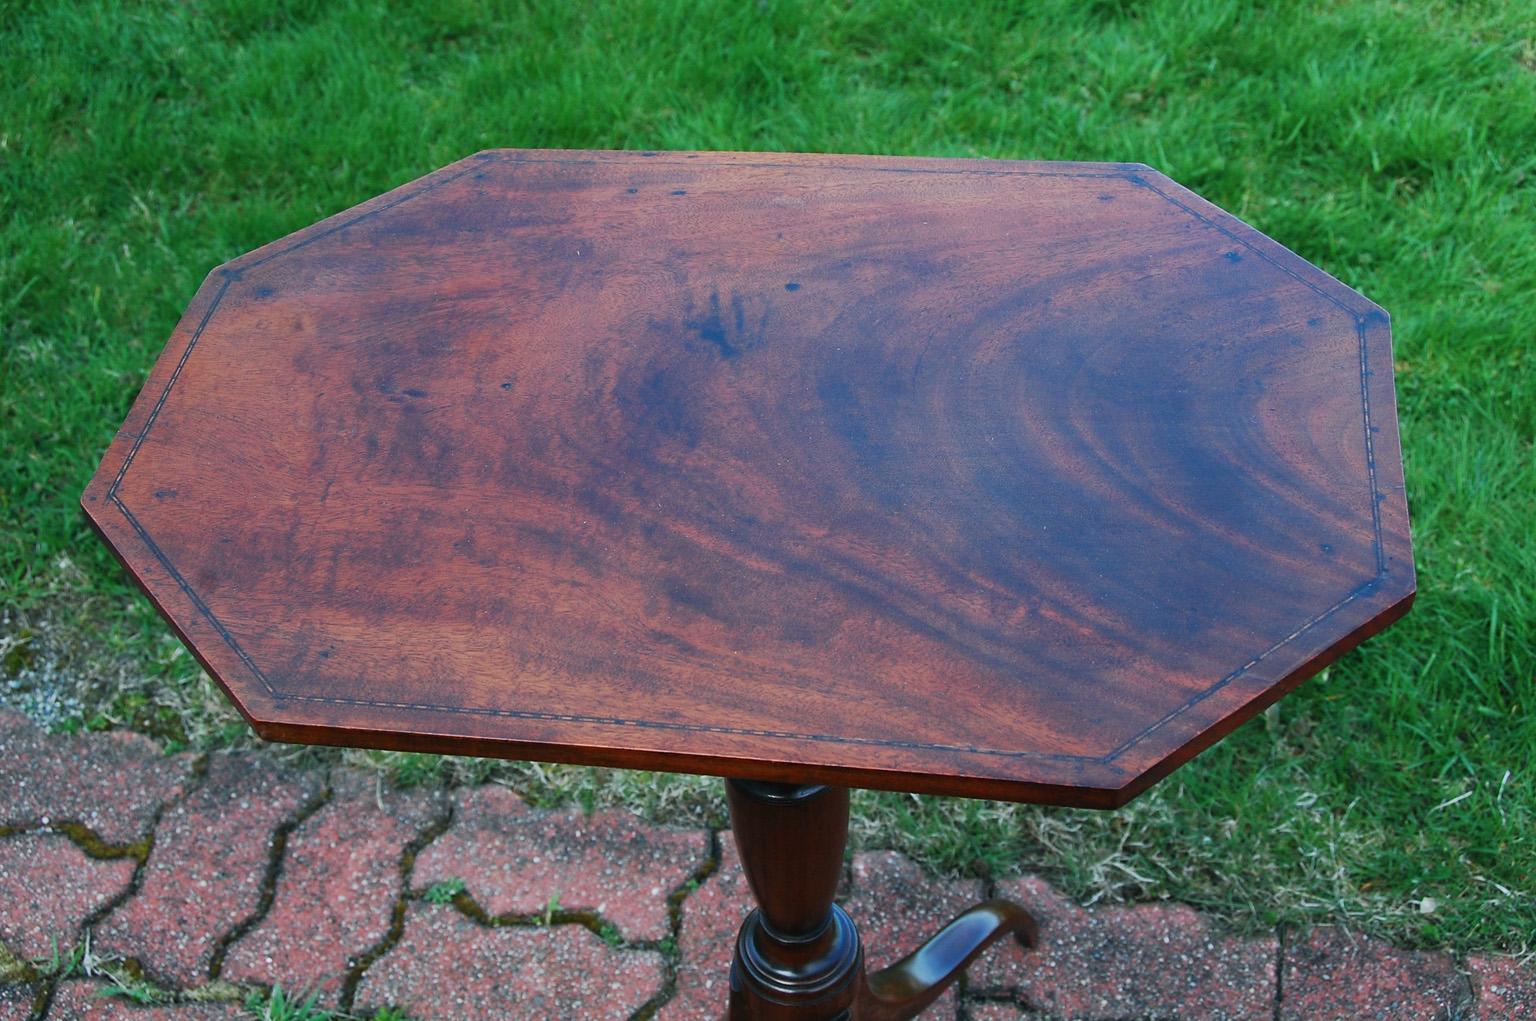 Early 19th Century American Federal Mahogany Octagonal Tilt Table, Urn Shaped Stem, Portsmouth NH